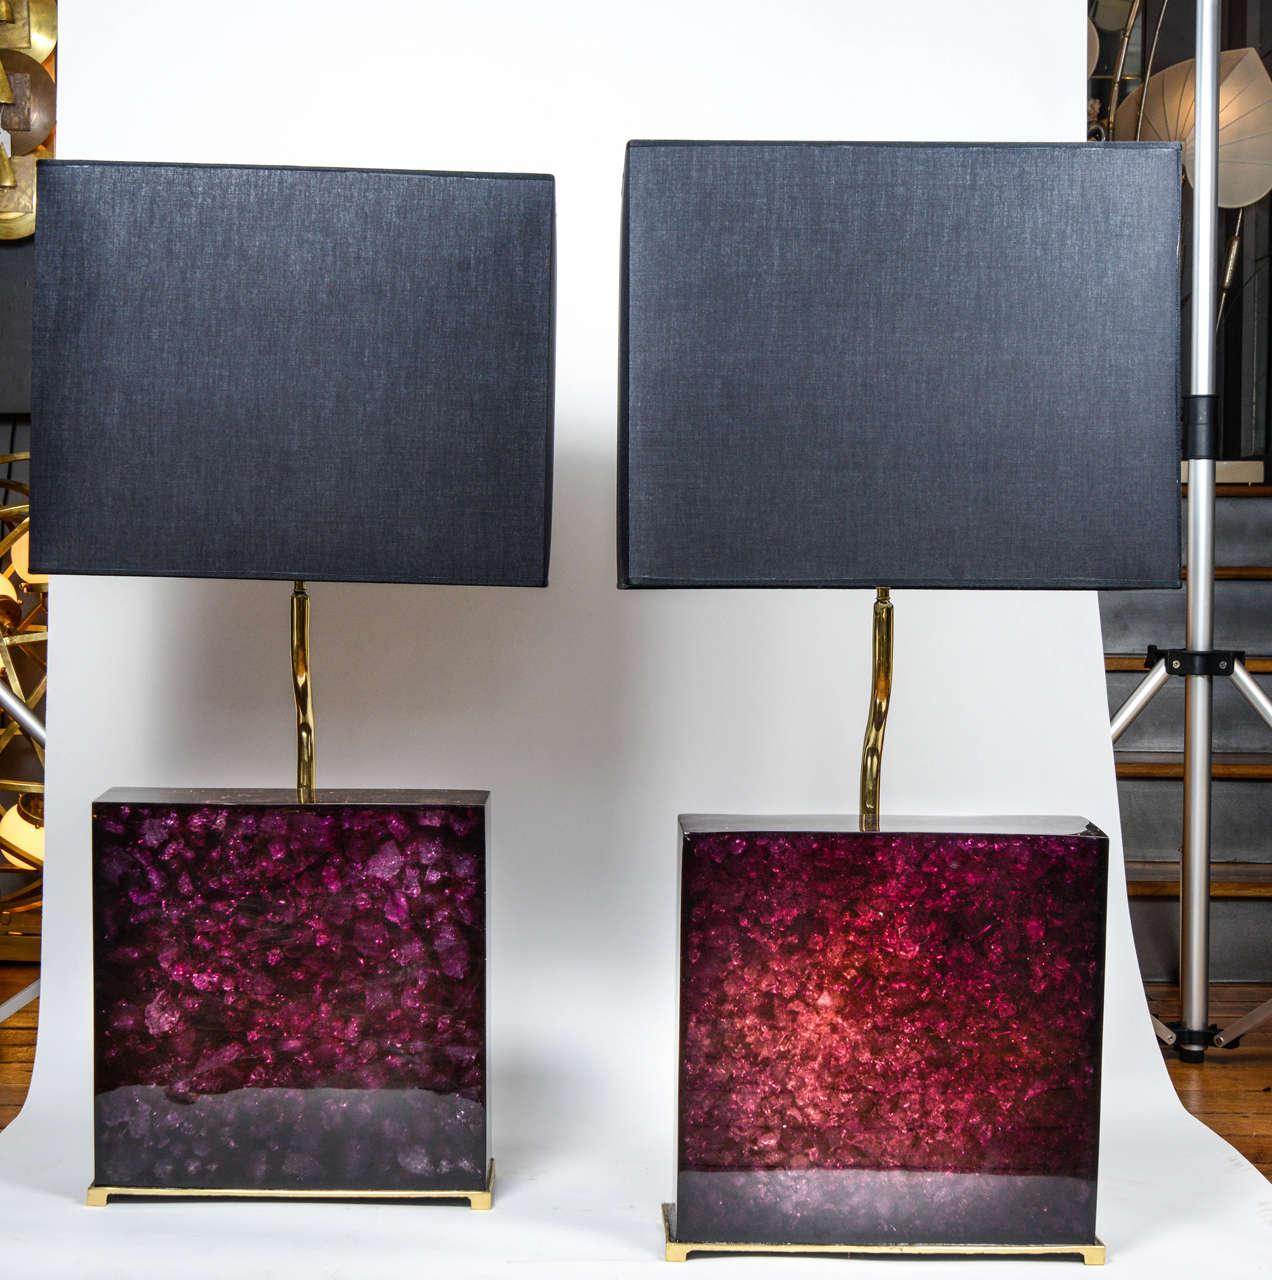 This is a pair of lamps by Enzo Missoni made of crushed Murano glass contained in a big block of purple fractal resin sit on gilded bronze feet. The lamps are both signed 